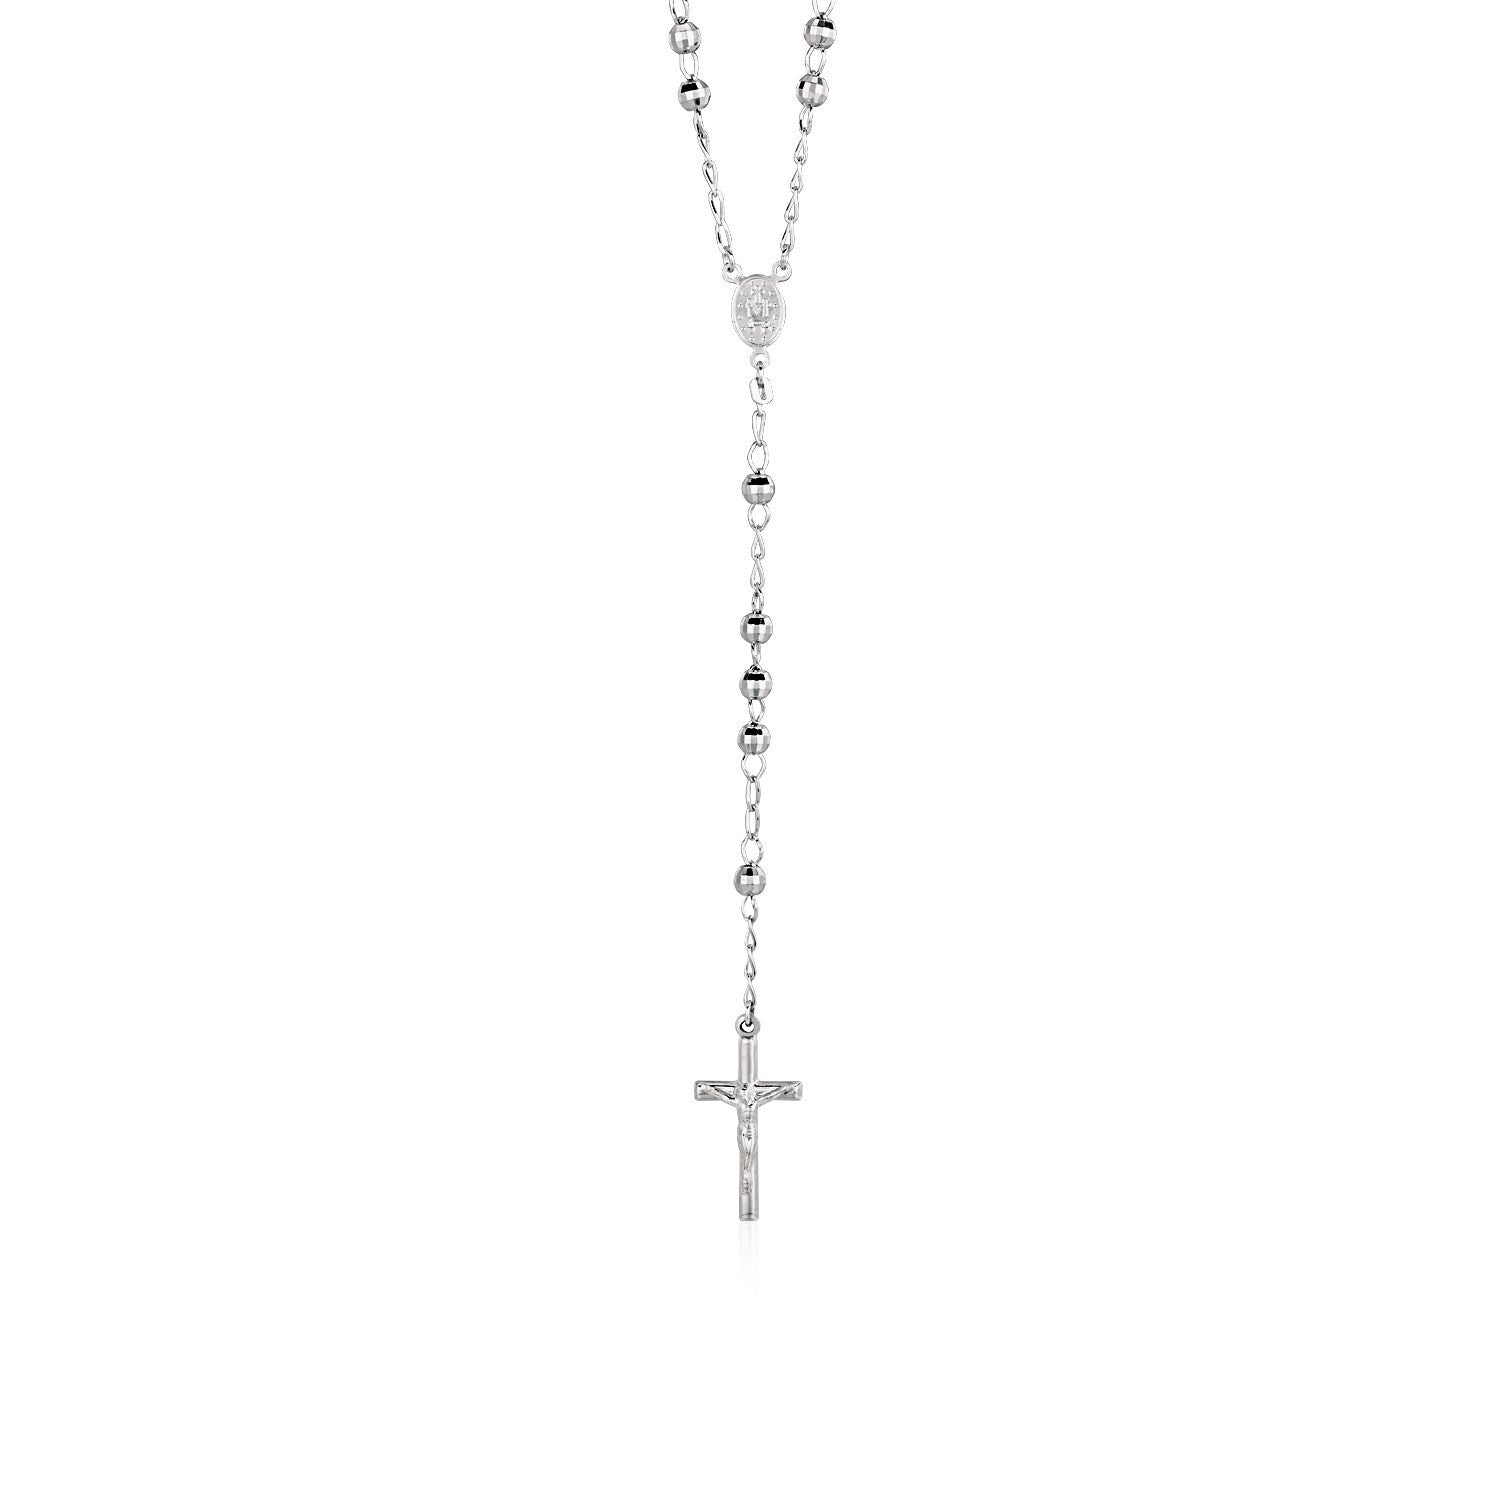 Rosary Chain and Large Bead Necklace in Sterling Silver, size 26''